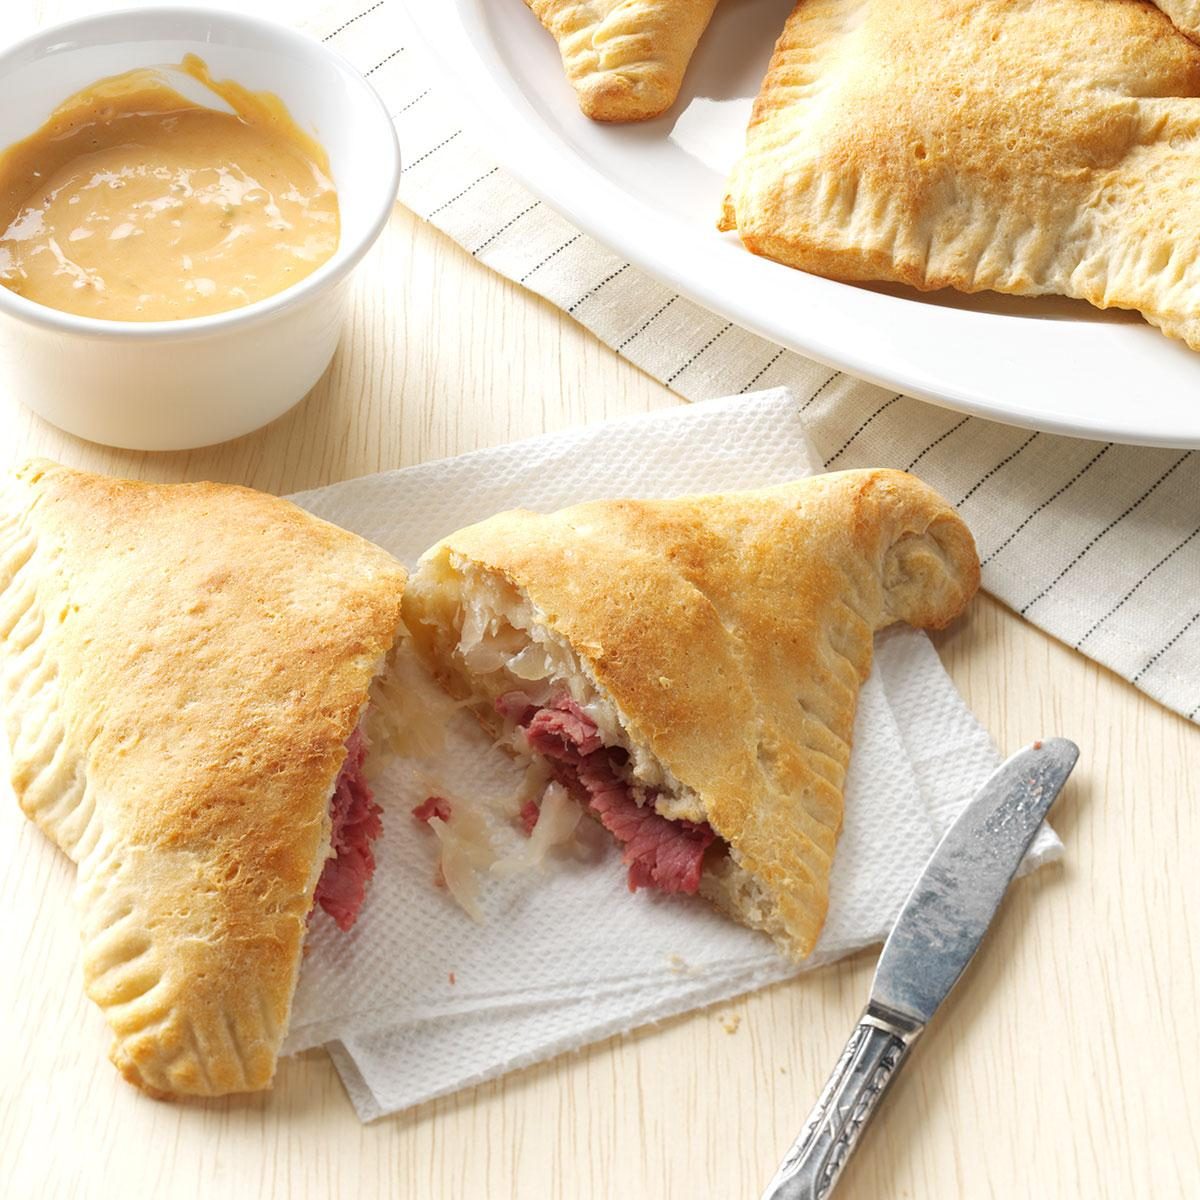 <p>I love a Reuben sandwich, so I tried the fillings in a pizza pocket instead of on rye bread. This hand-held dinner is a big winner at our house. —Nickie Frye, Evansville, Indiana </p> <div class="listicle-page__cta-button"><a href='https://www.tasteofhome.com/recipes/reuben-calzones/'>Get Recipe</a></div>